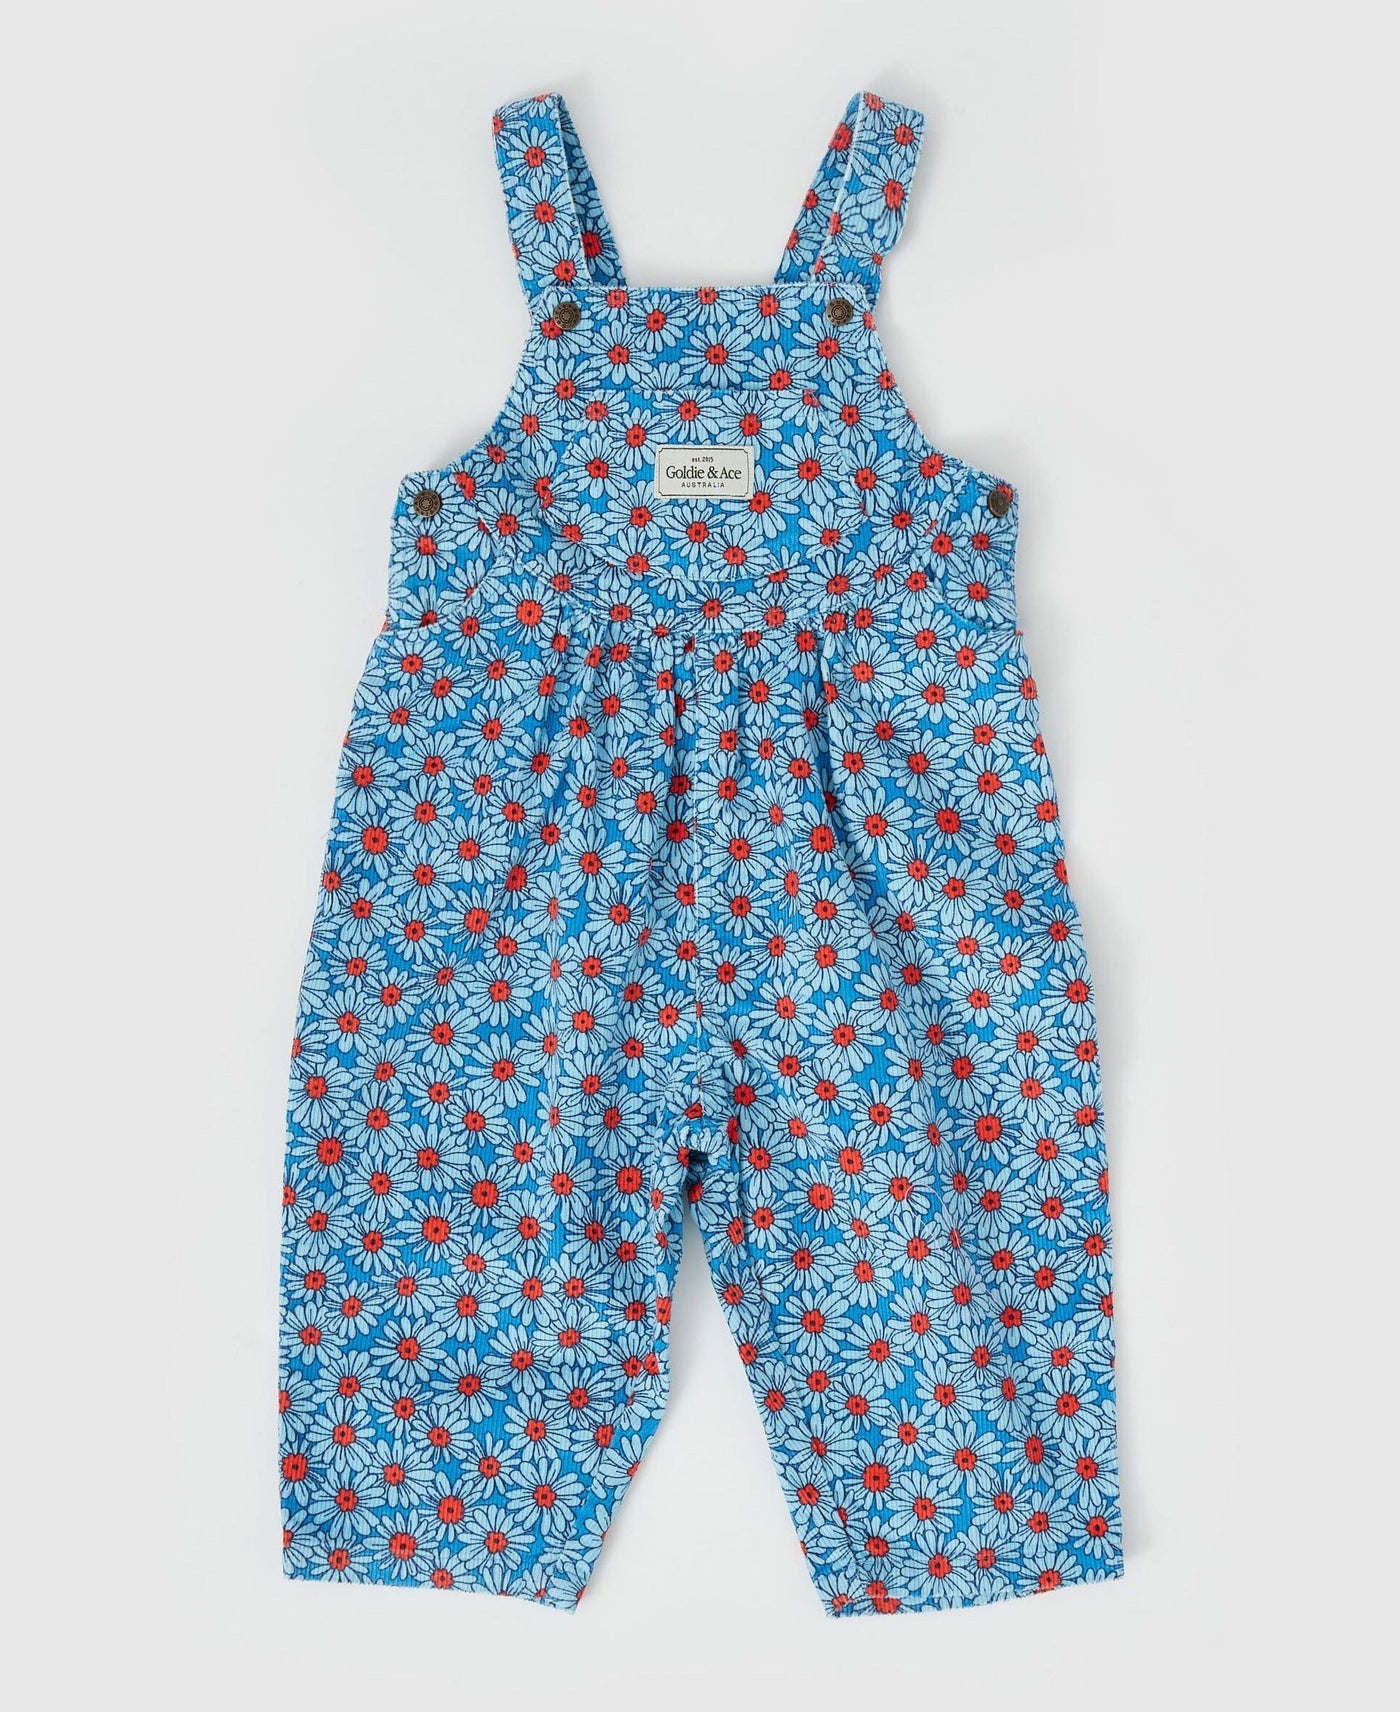 Goldie & Ace Goldie Vintage Overall Dixie Daisy Corduroy - Blue Red Overalls Goldie & Ace 